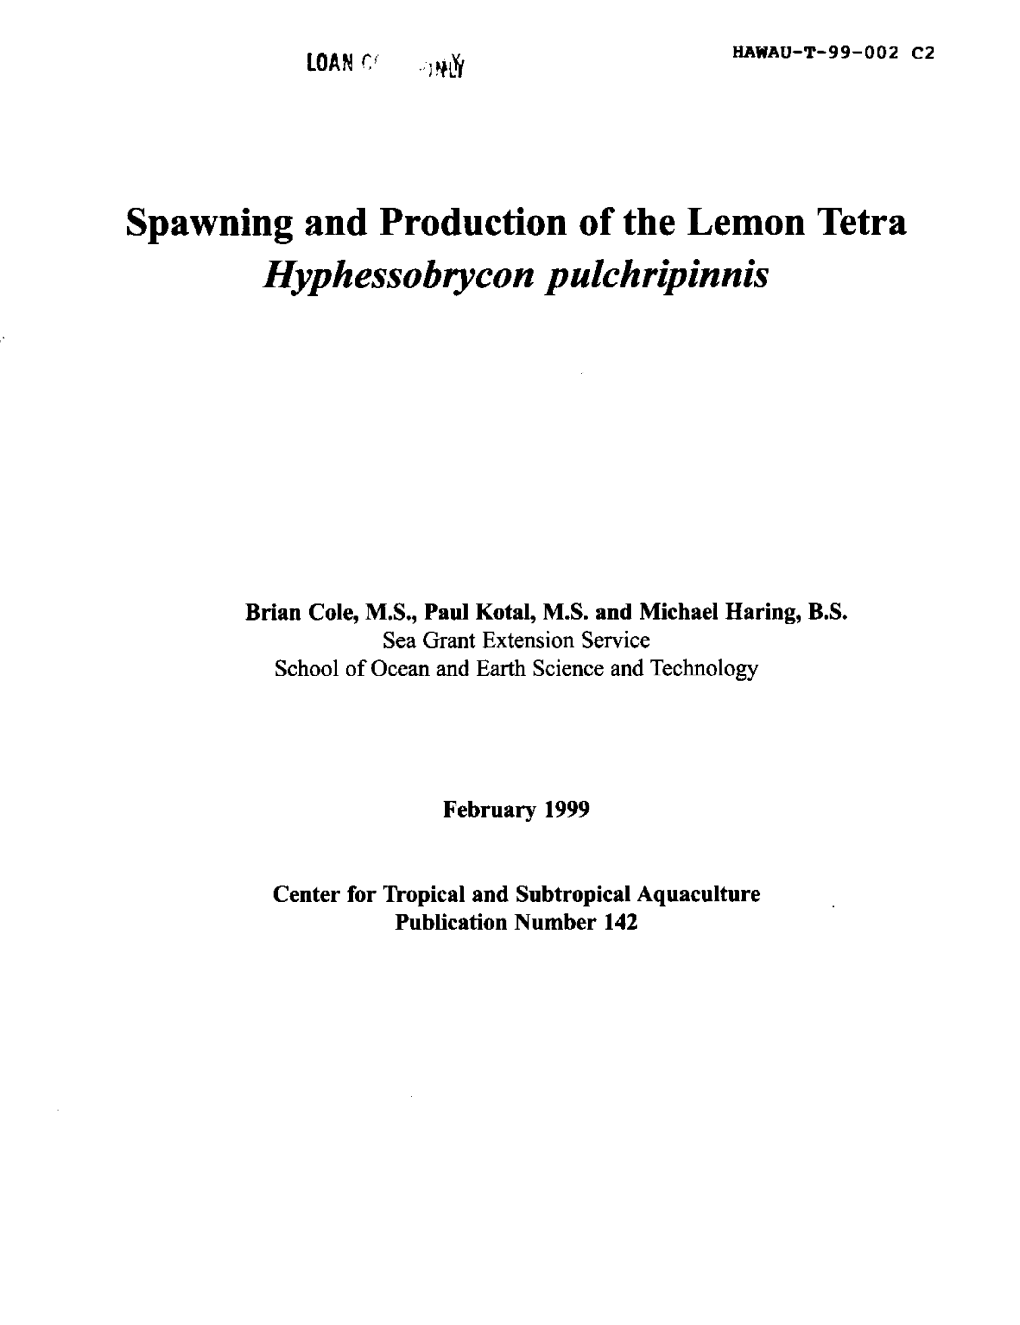 Spawning and Production of the Lemon Tetra Hyphessobryconpalchripinnis